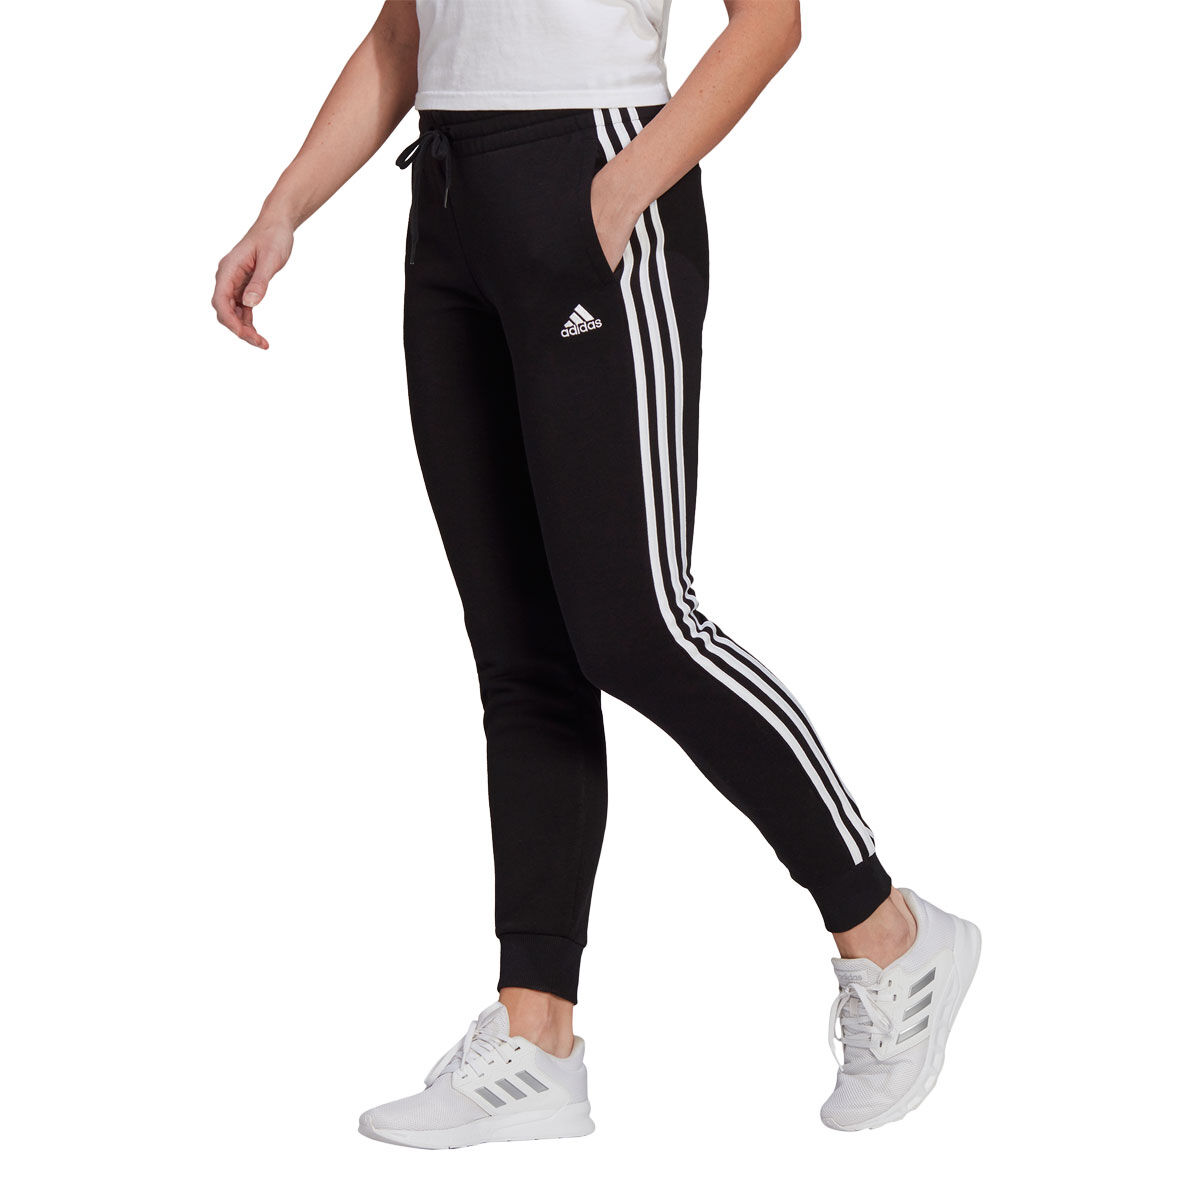 Maroon Track Pant by Adidas Originals - Trousers & Leggings - Clothing -  Topshop | Adidas tracksuit women, Tracksuit women, Topshop outfit